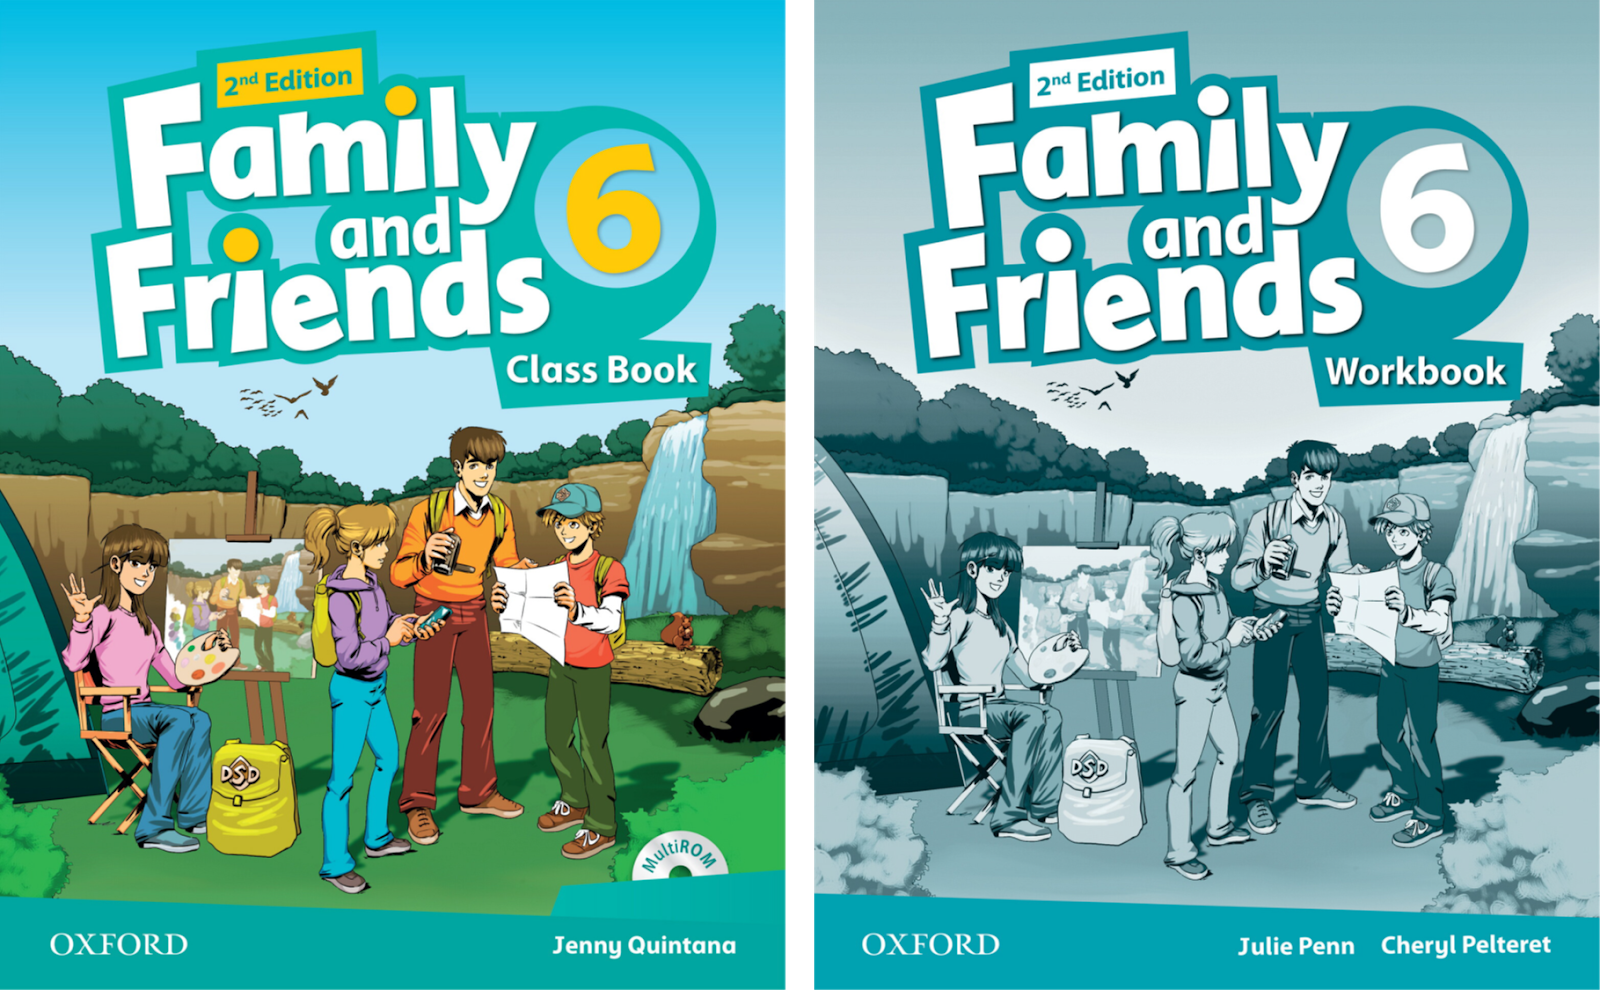 Фэмили френд. Family and friends 2 первое издание. Family and friends 2 2nd Edition Classbook. Family and friends (2nd Edition) 1 class book. \Фэмили энд френдс 2 издание.